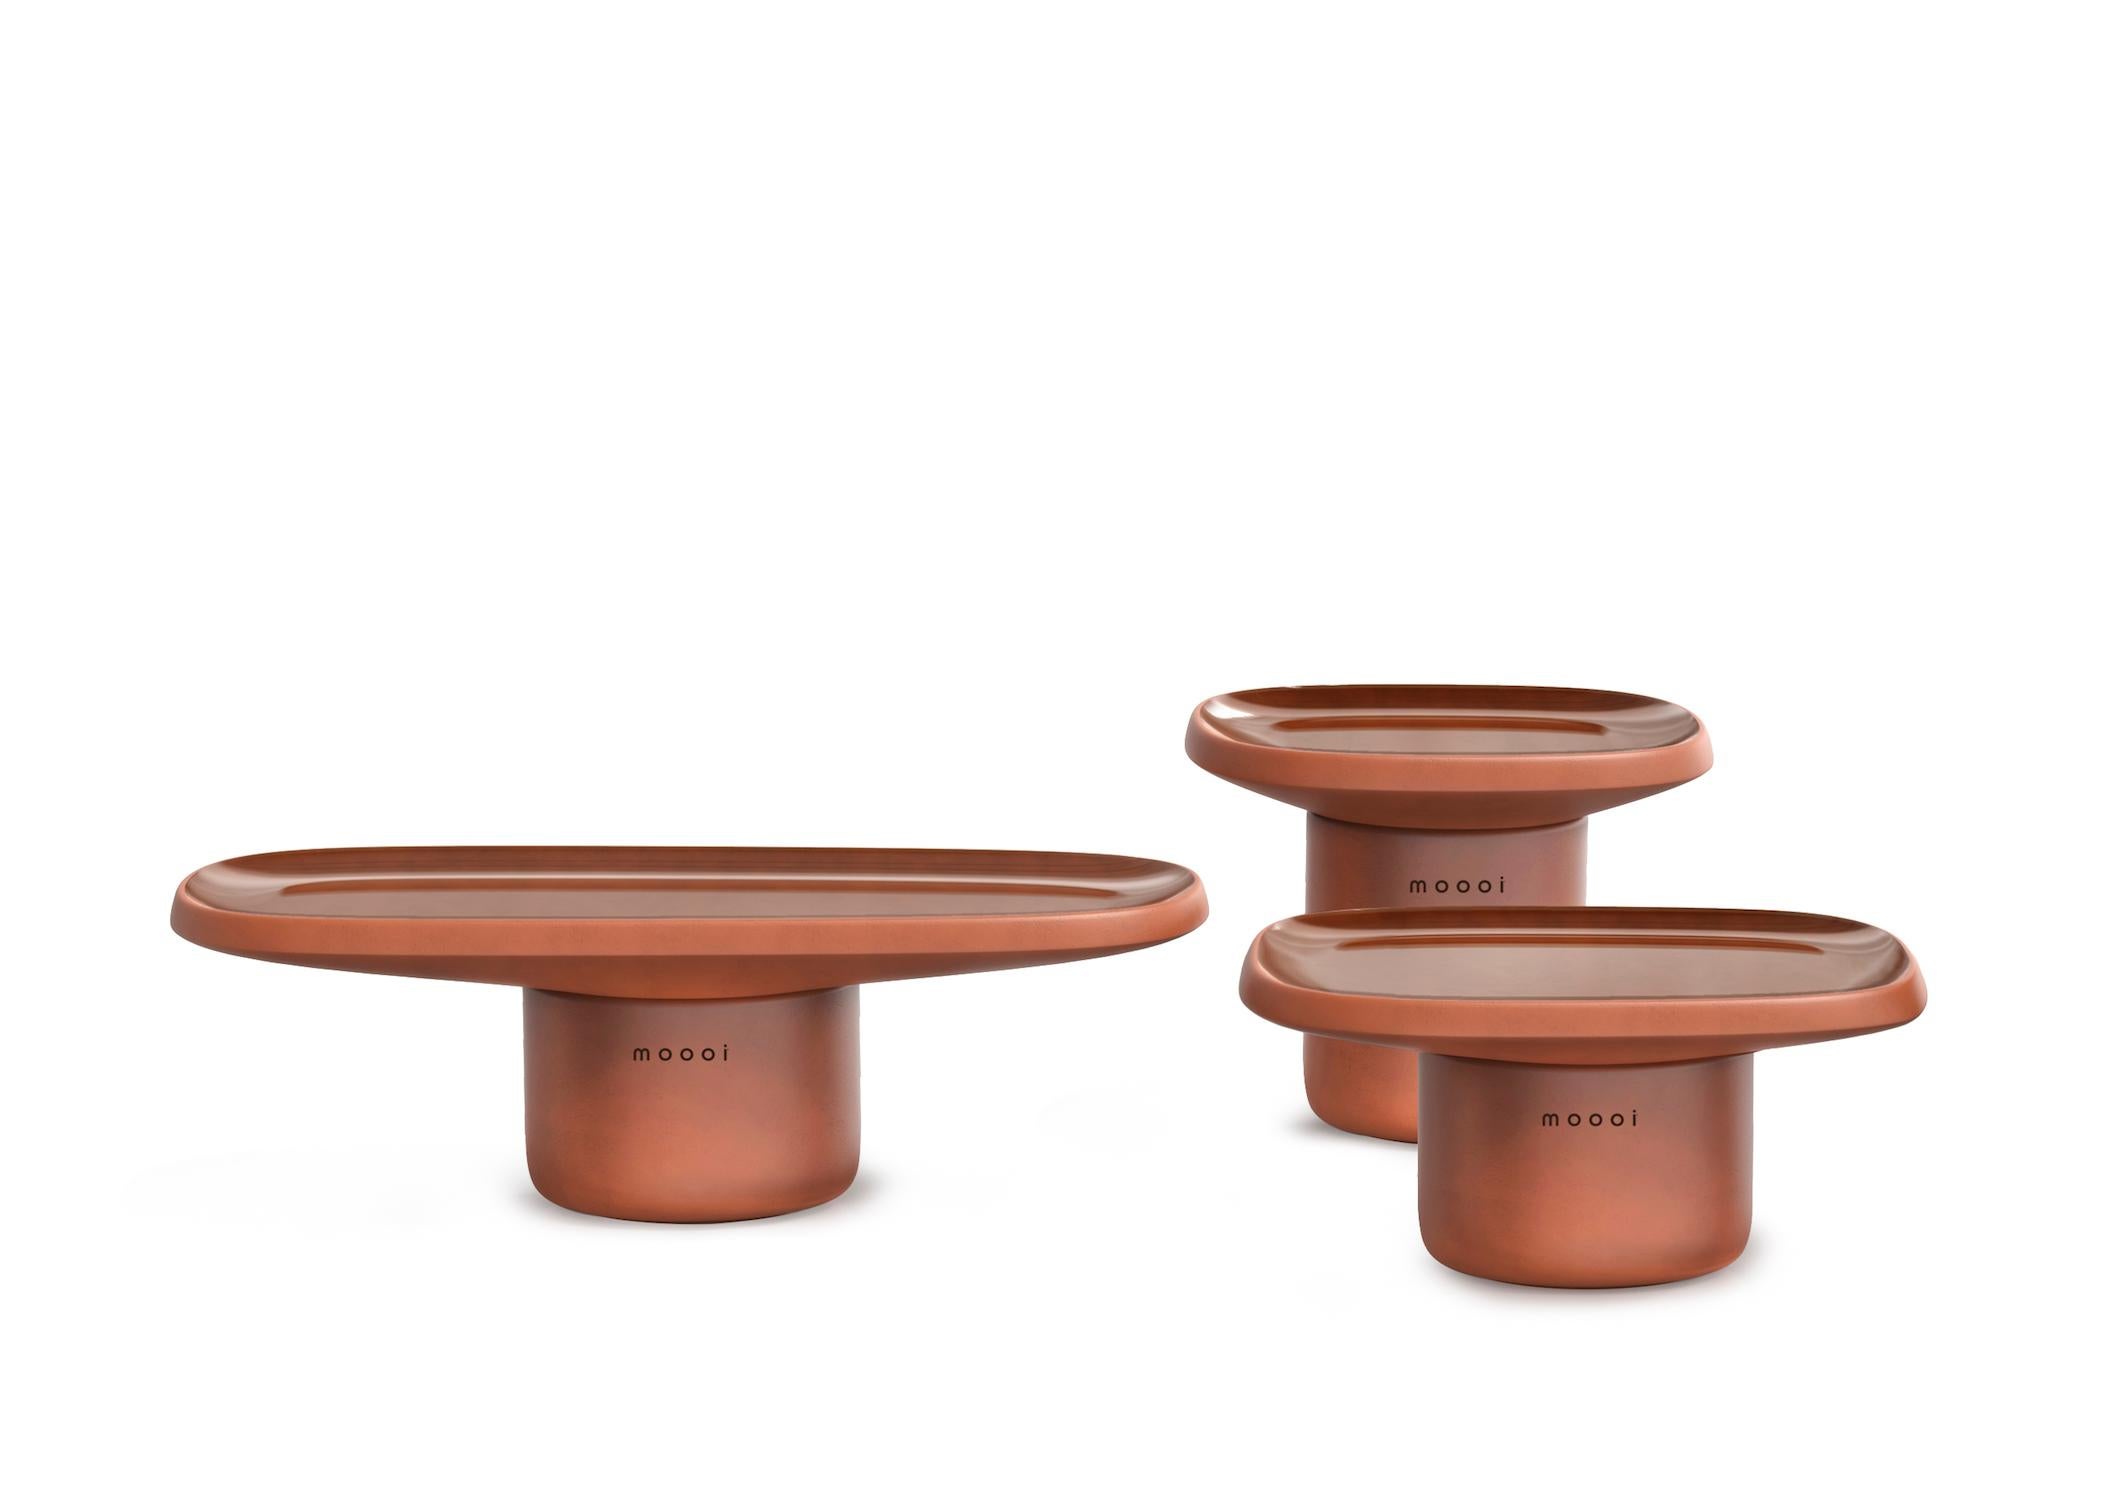 Obon is a collection of 3 tables inspired by an ancient, irregular material: Terracotta. With its origins lost in the mists of time, terra-cotta is at the base of millenary archaeological finds all over the world.

The Obon has a raw terra-cotta